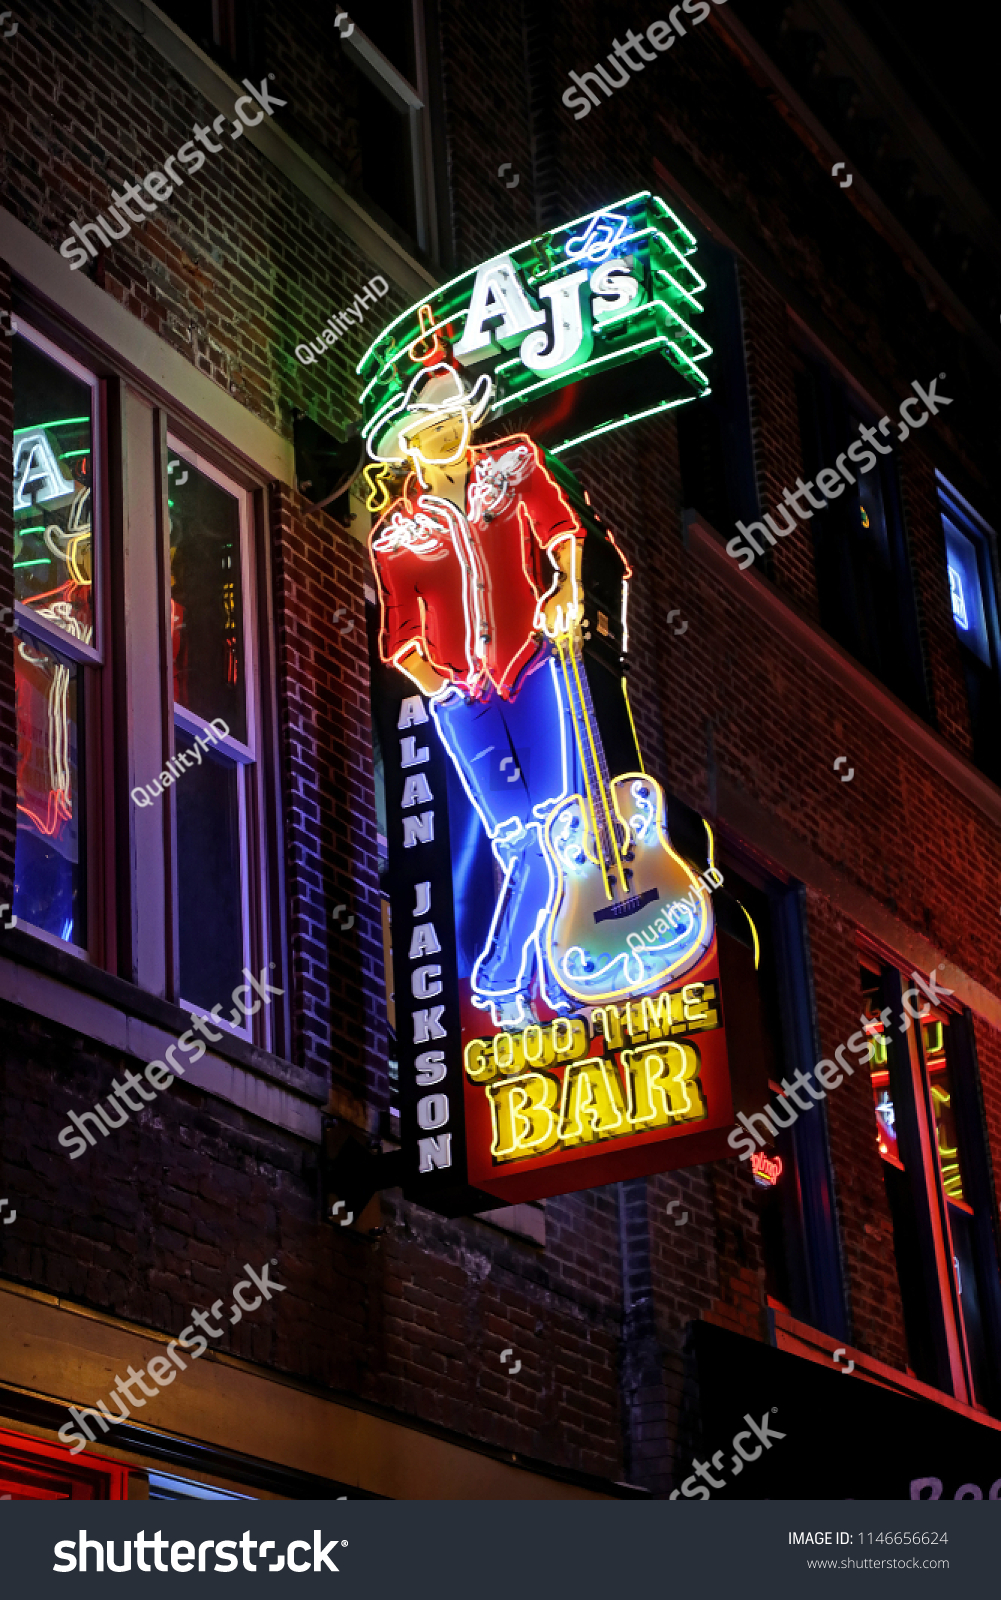 Alan Jackson Country Star S Good Time Bar Neon Sign Historic Broadway Nashville Tennessee Usa May 17